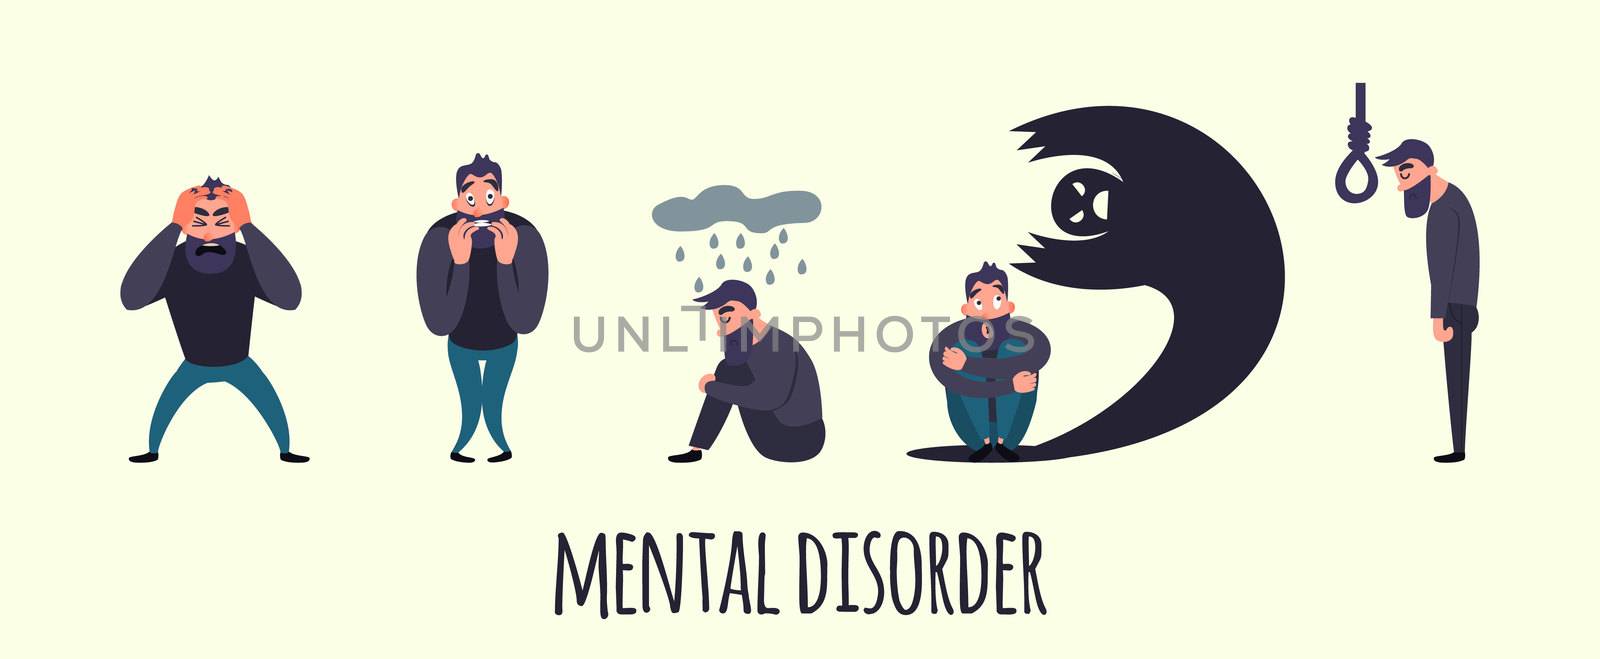 Group of people with psychology or psychiatric problem. Illness men in anxiety disorder. Phobia, suicide, fear and other mental disorder illustration by Elena_Garder